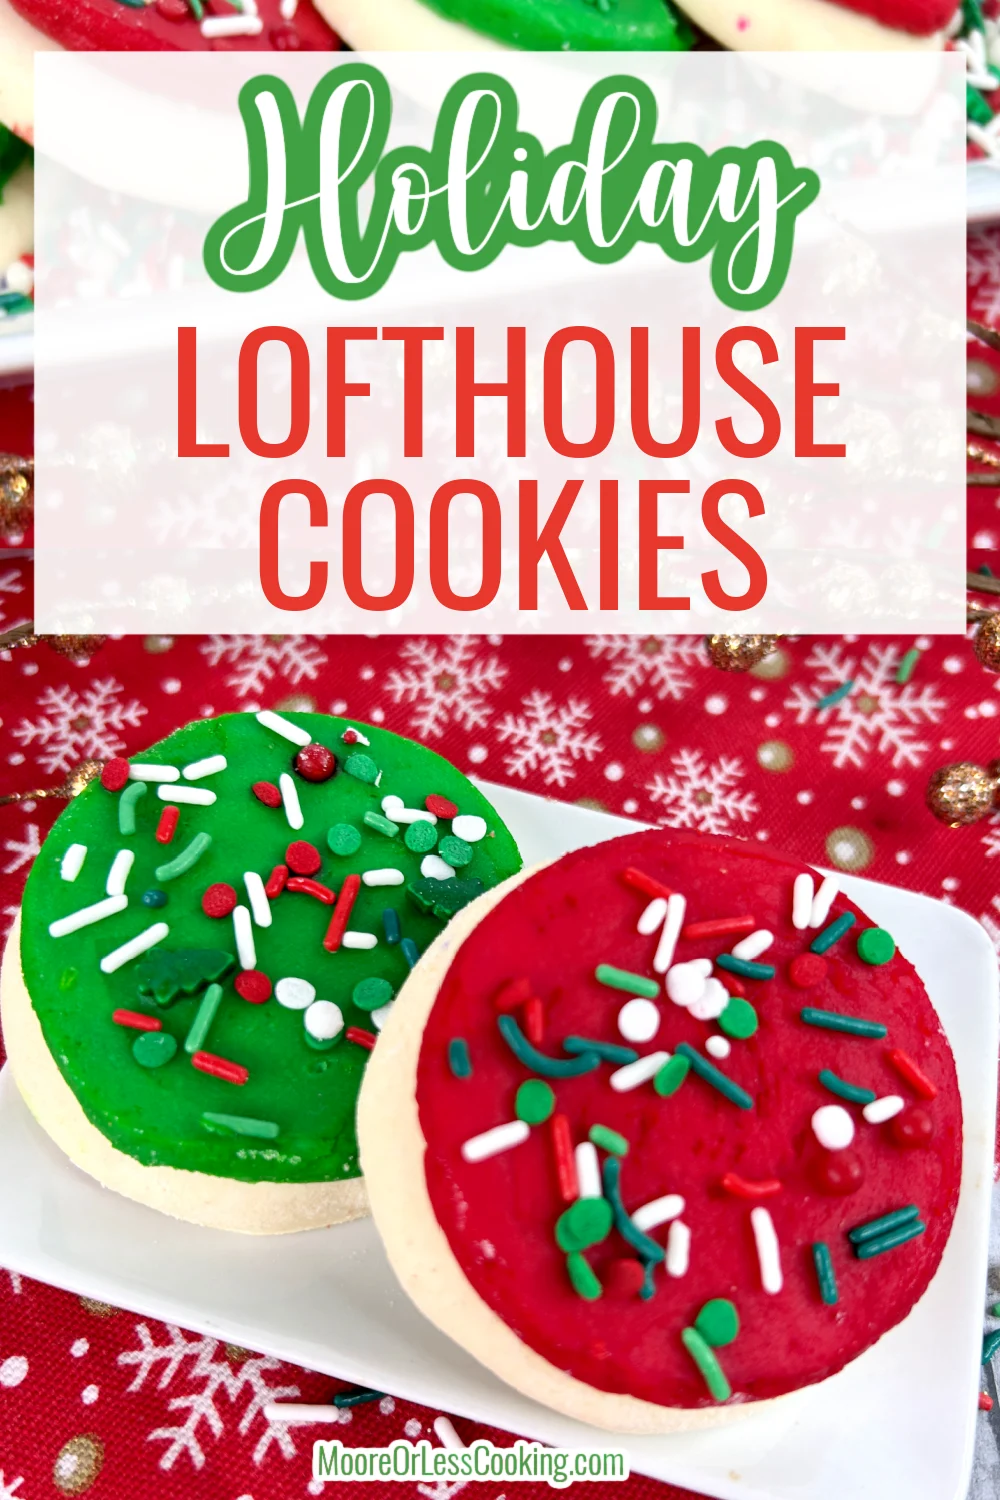 Christmas is the perfect time to make these irresistible cookies that are thick, chewy and piled high with a scrumptious buttery frosting. Garnish with festive sprinkles and these Holiday Lofthouse Cookies are ready for the cookie platter! via @Mooreorlesscook